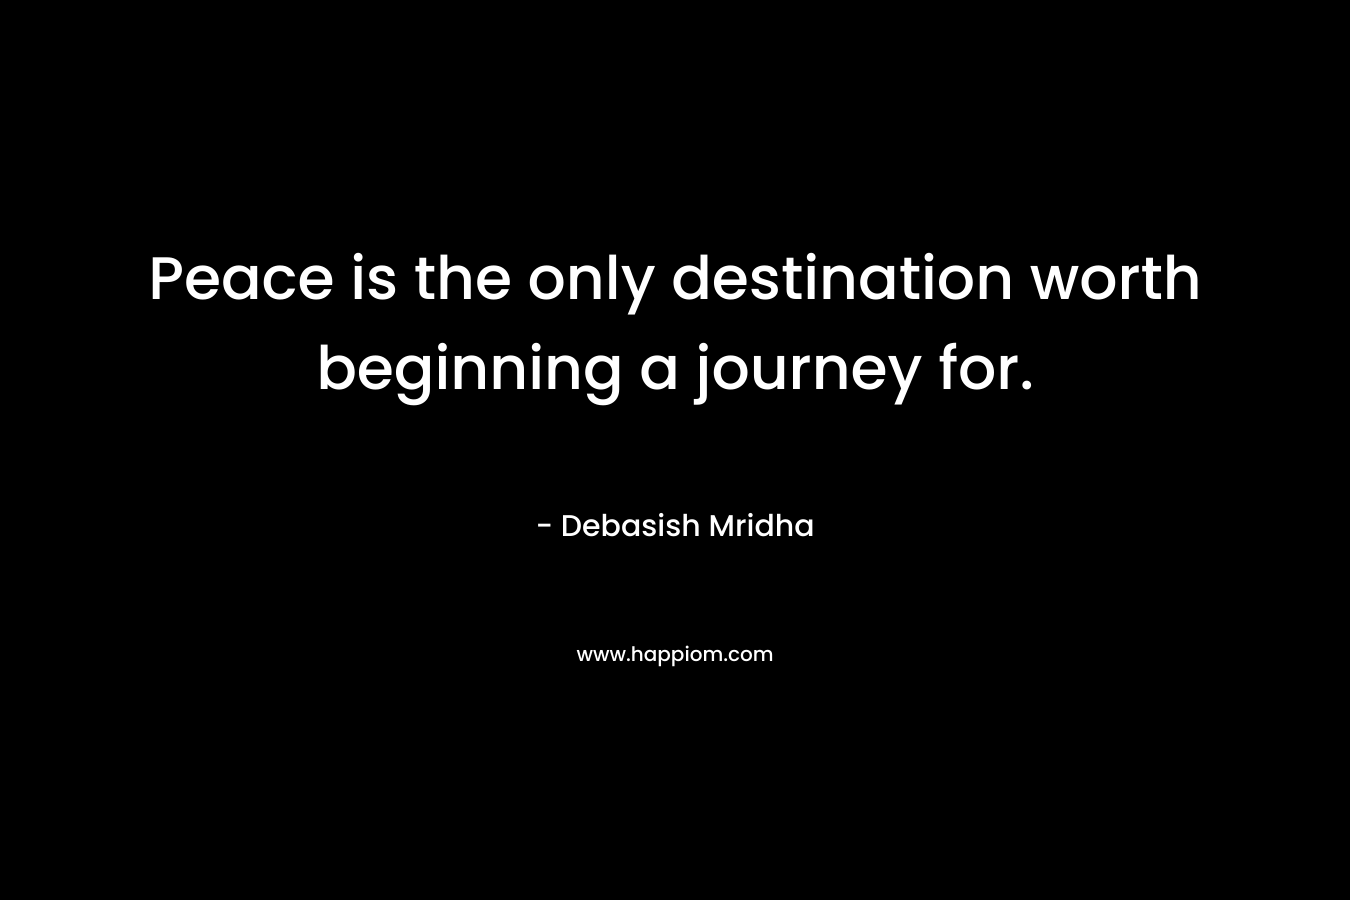 Peace is the only destination worth beginning a journey for.